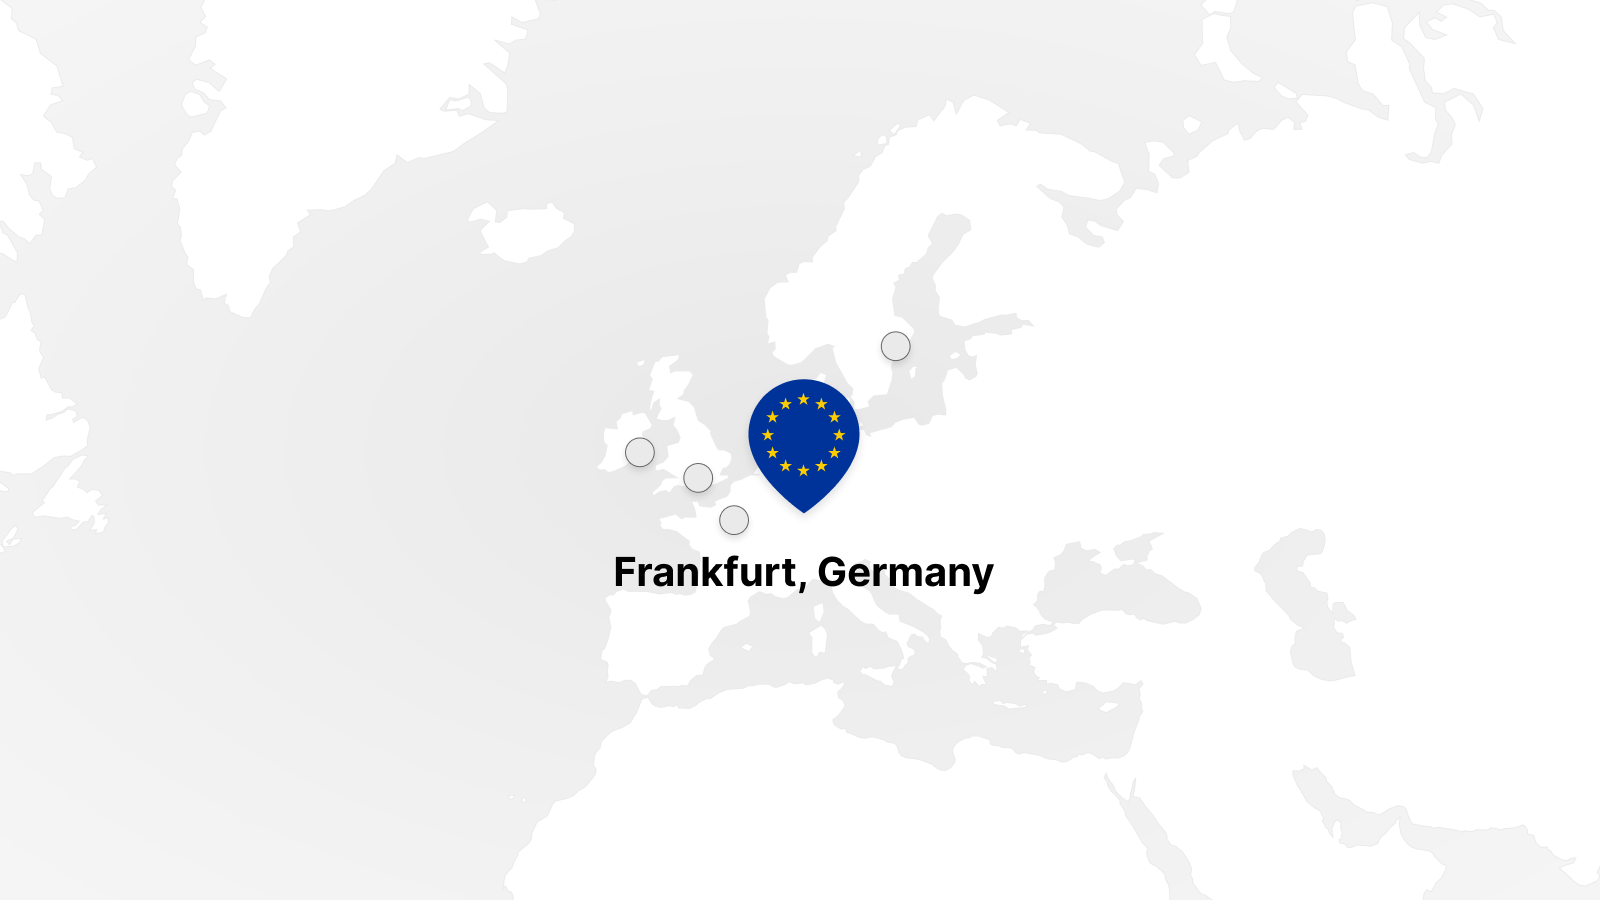 Cover for Frankfurt (Germany) is now available on the Edge Network